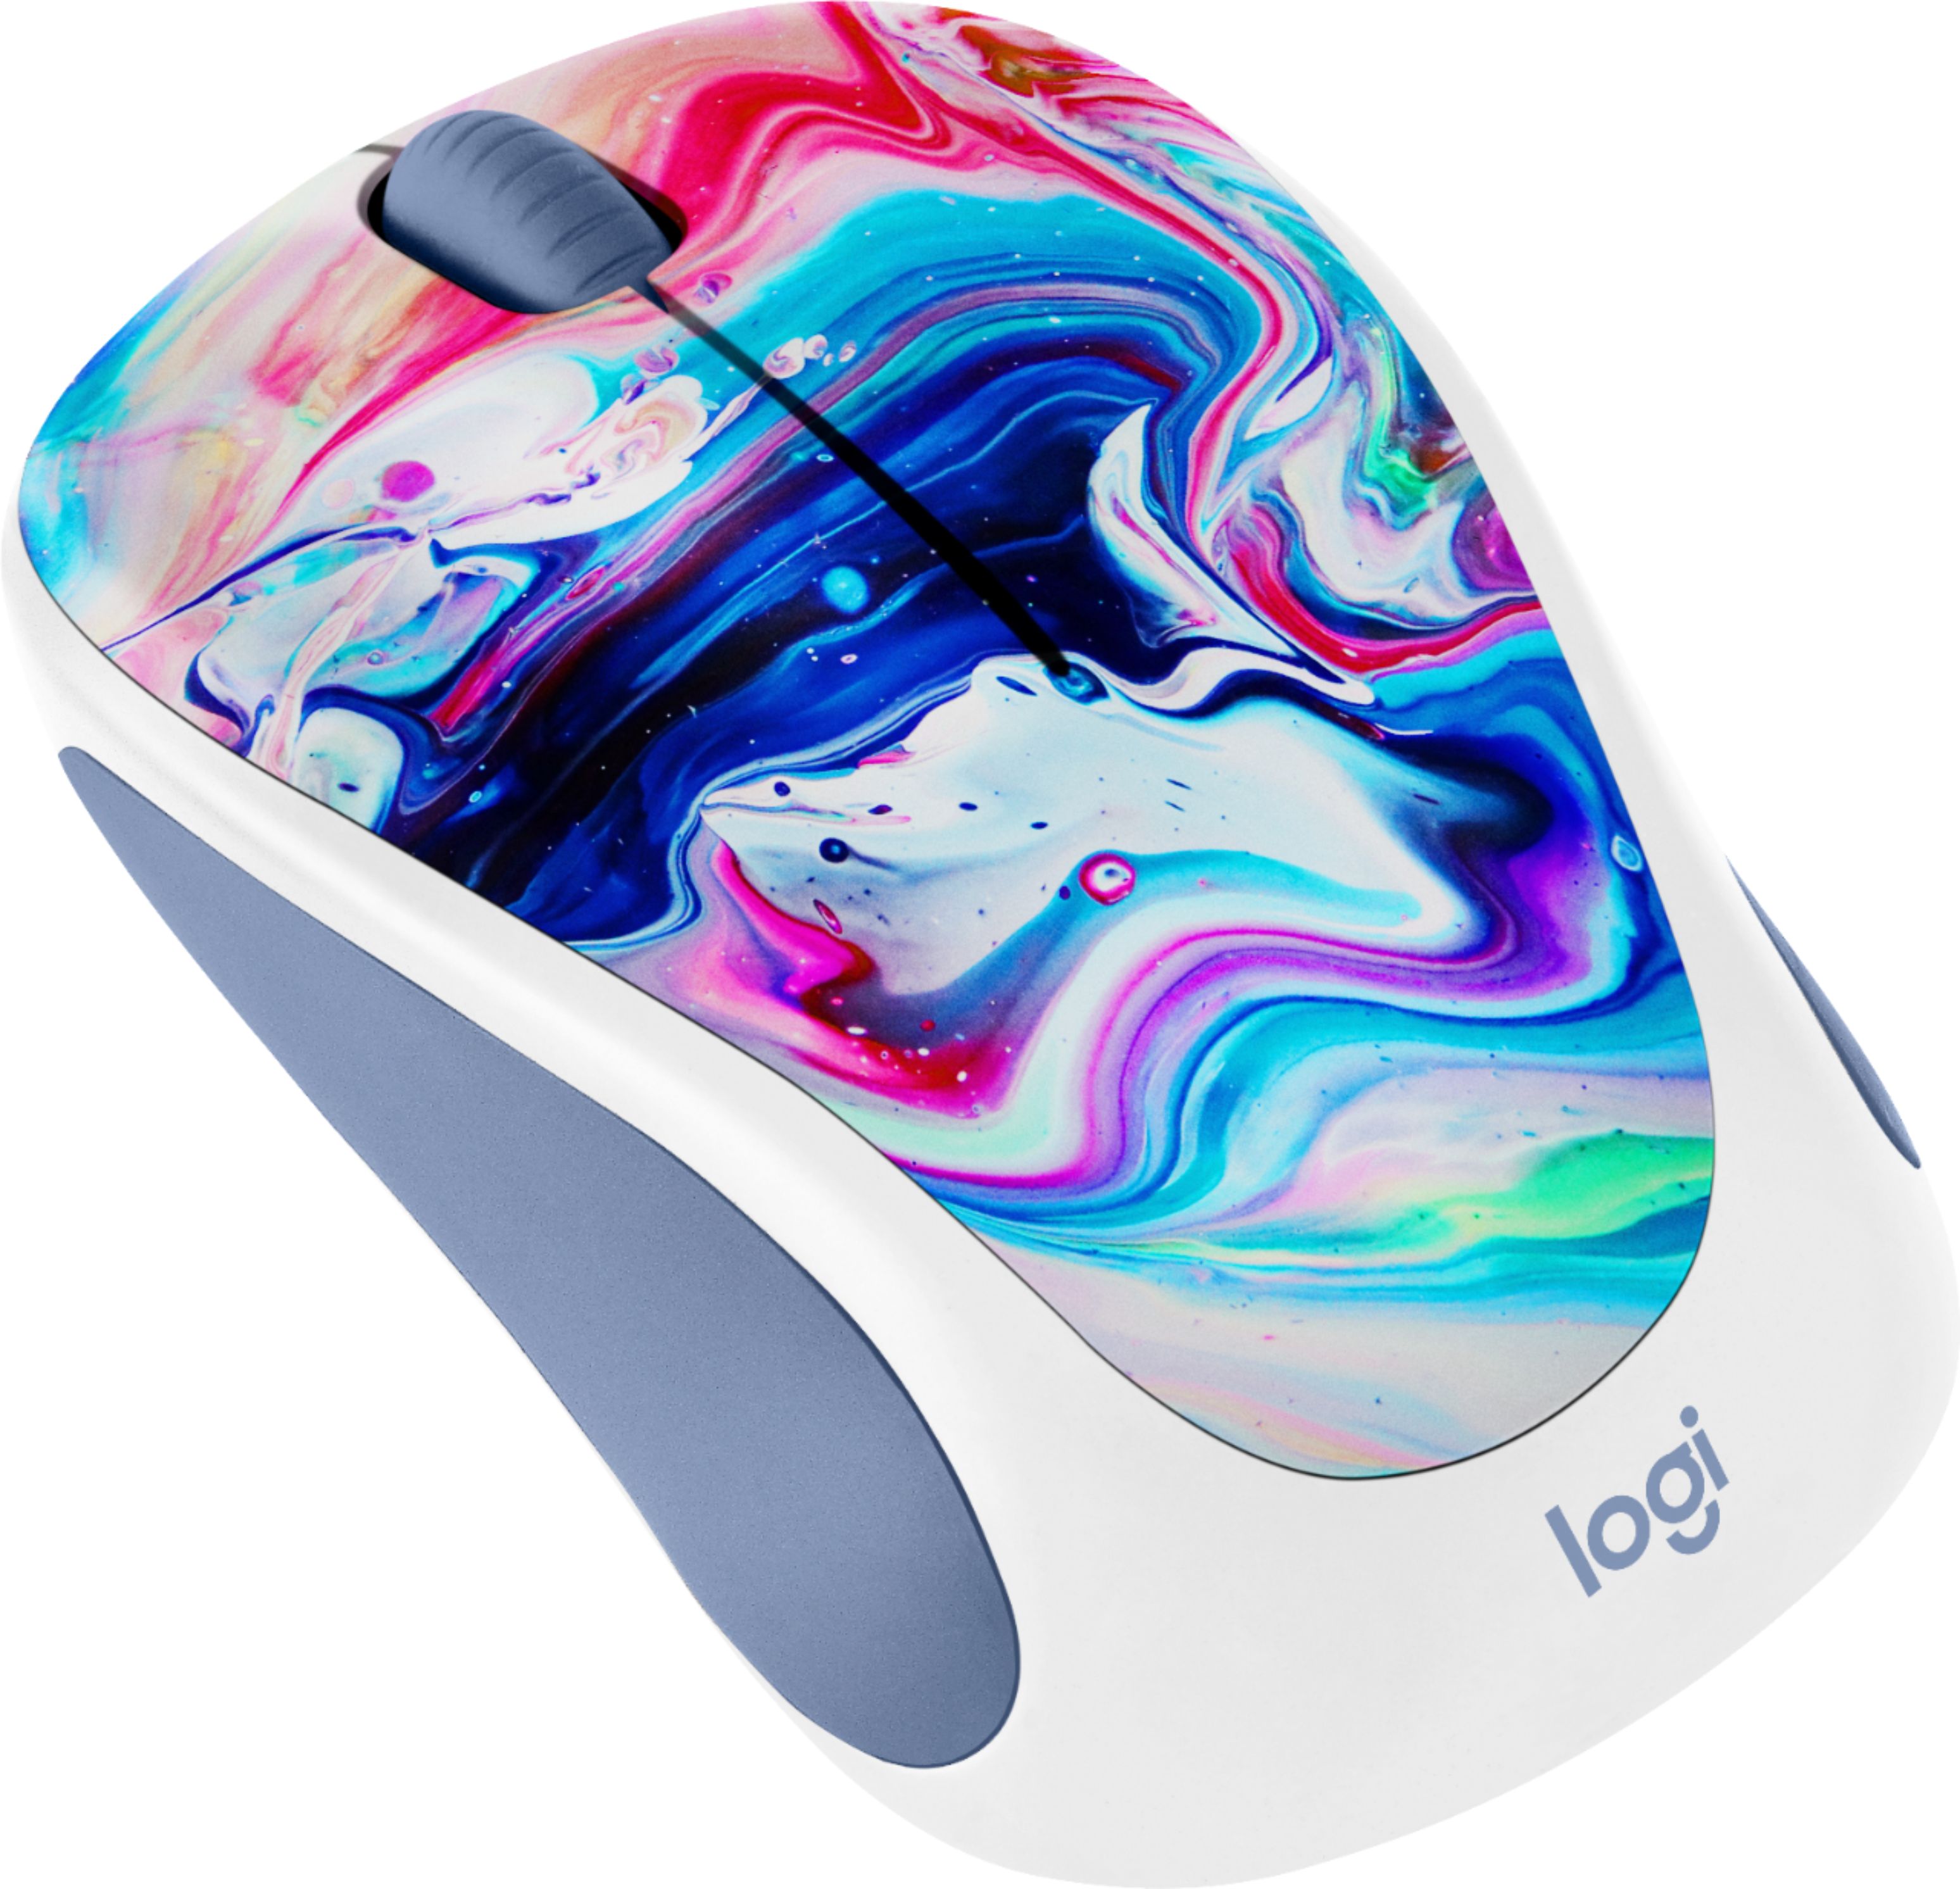 Logitech - Design Collection Wireless Optical Mouse with Nano Receiver - Cosmic Play